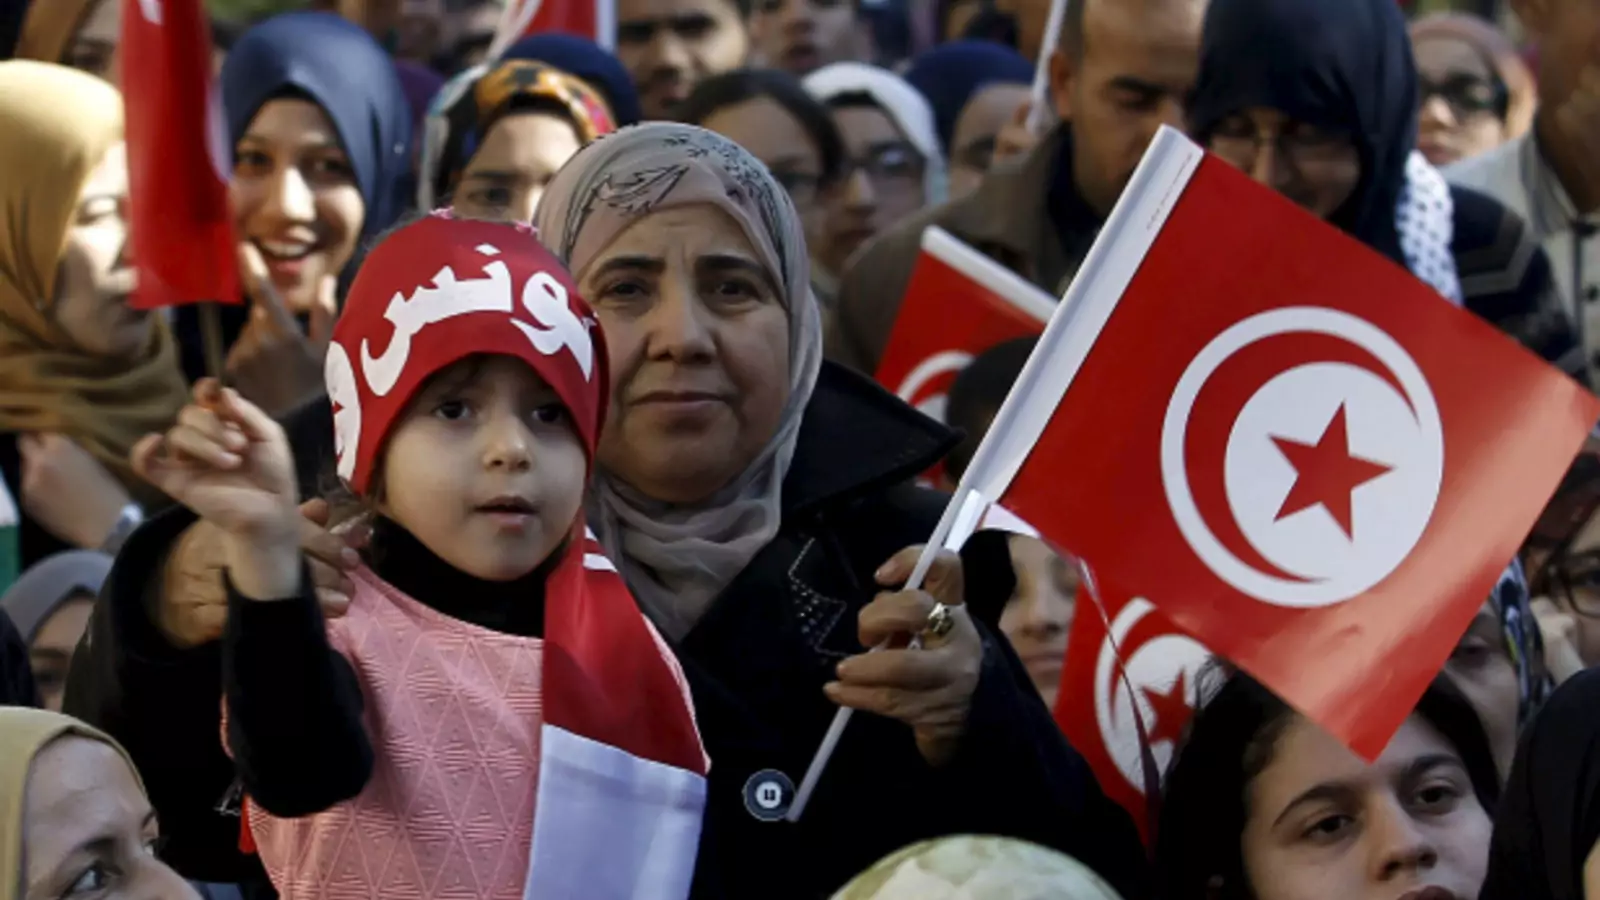 Persecution of Christians and Other Religious Minorities Still Rampant in Tunisia 10 Years After Revolution